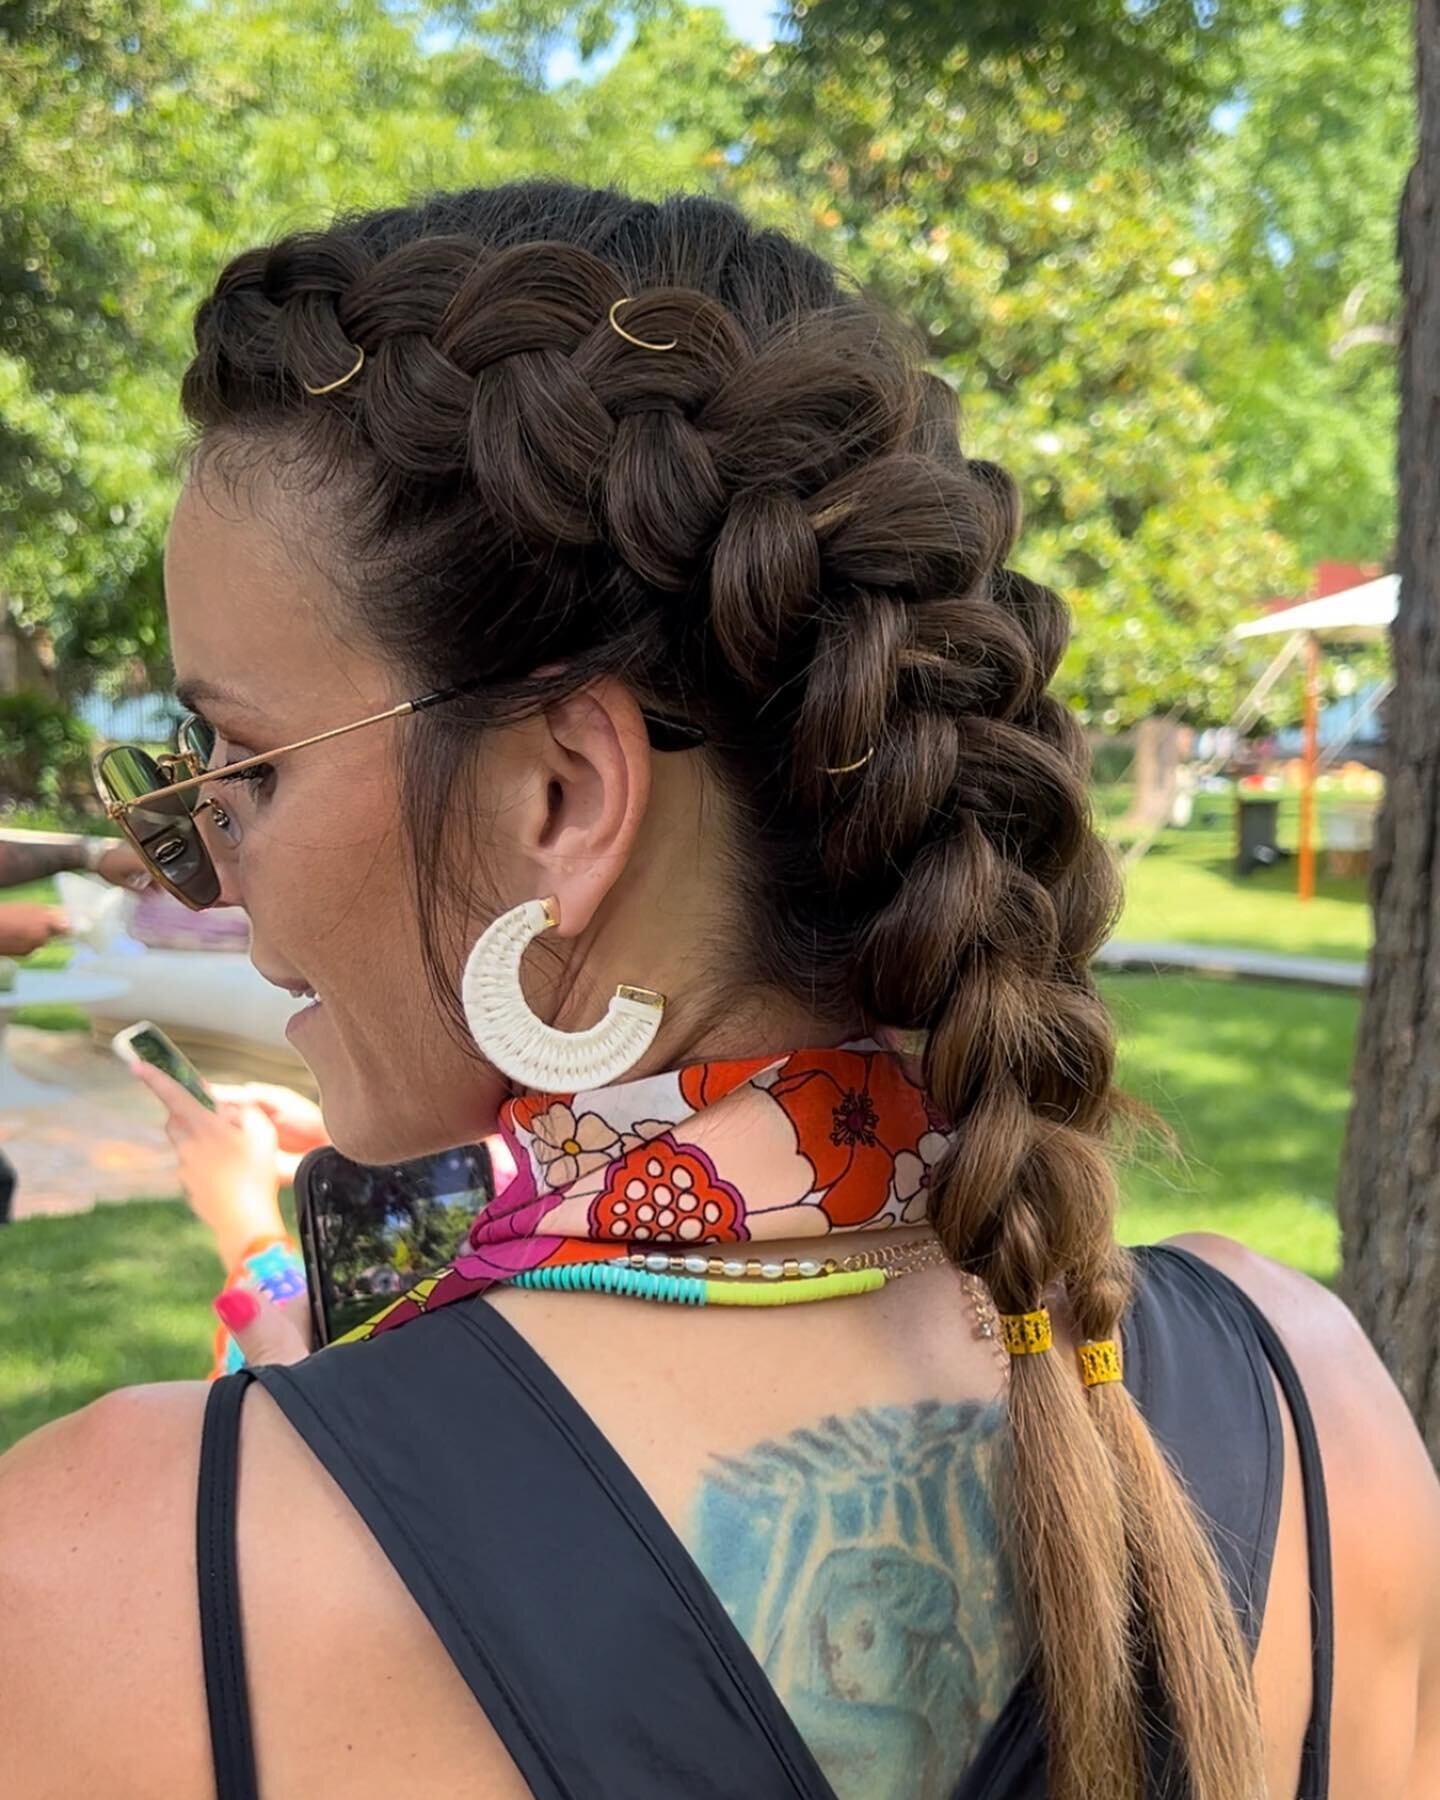 Had an amazing time in Austin being a vendor at the @theechelononlakeaustin music fest. 
Hairstylist team:
@austinscottstyles 
@anqhair 
located out of Houston, Texas
@laurengarciamakeup 
Located in Austin,Texas
.
Contact us for your event!
#braidbar